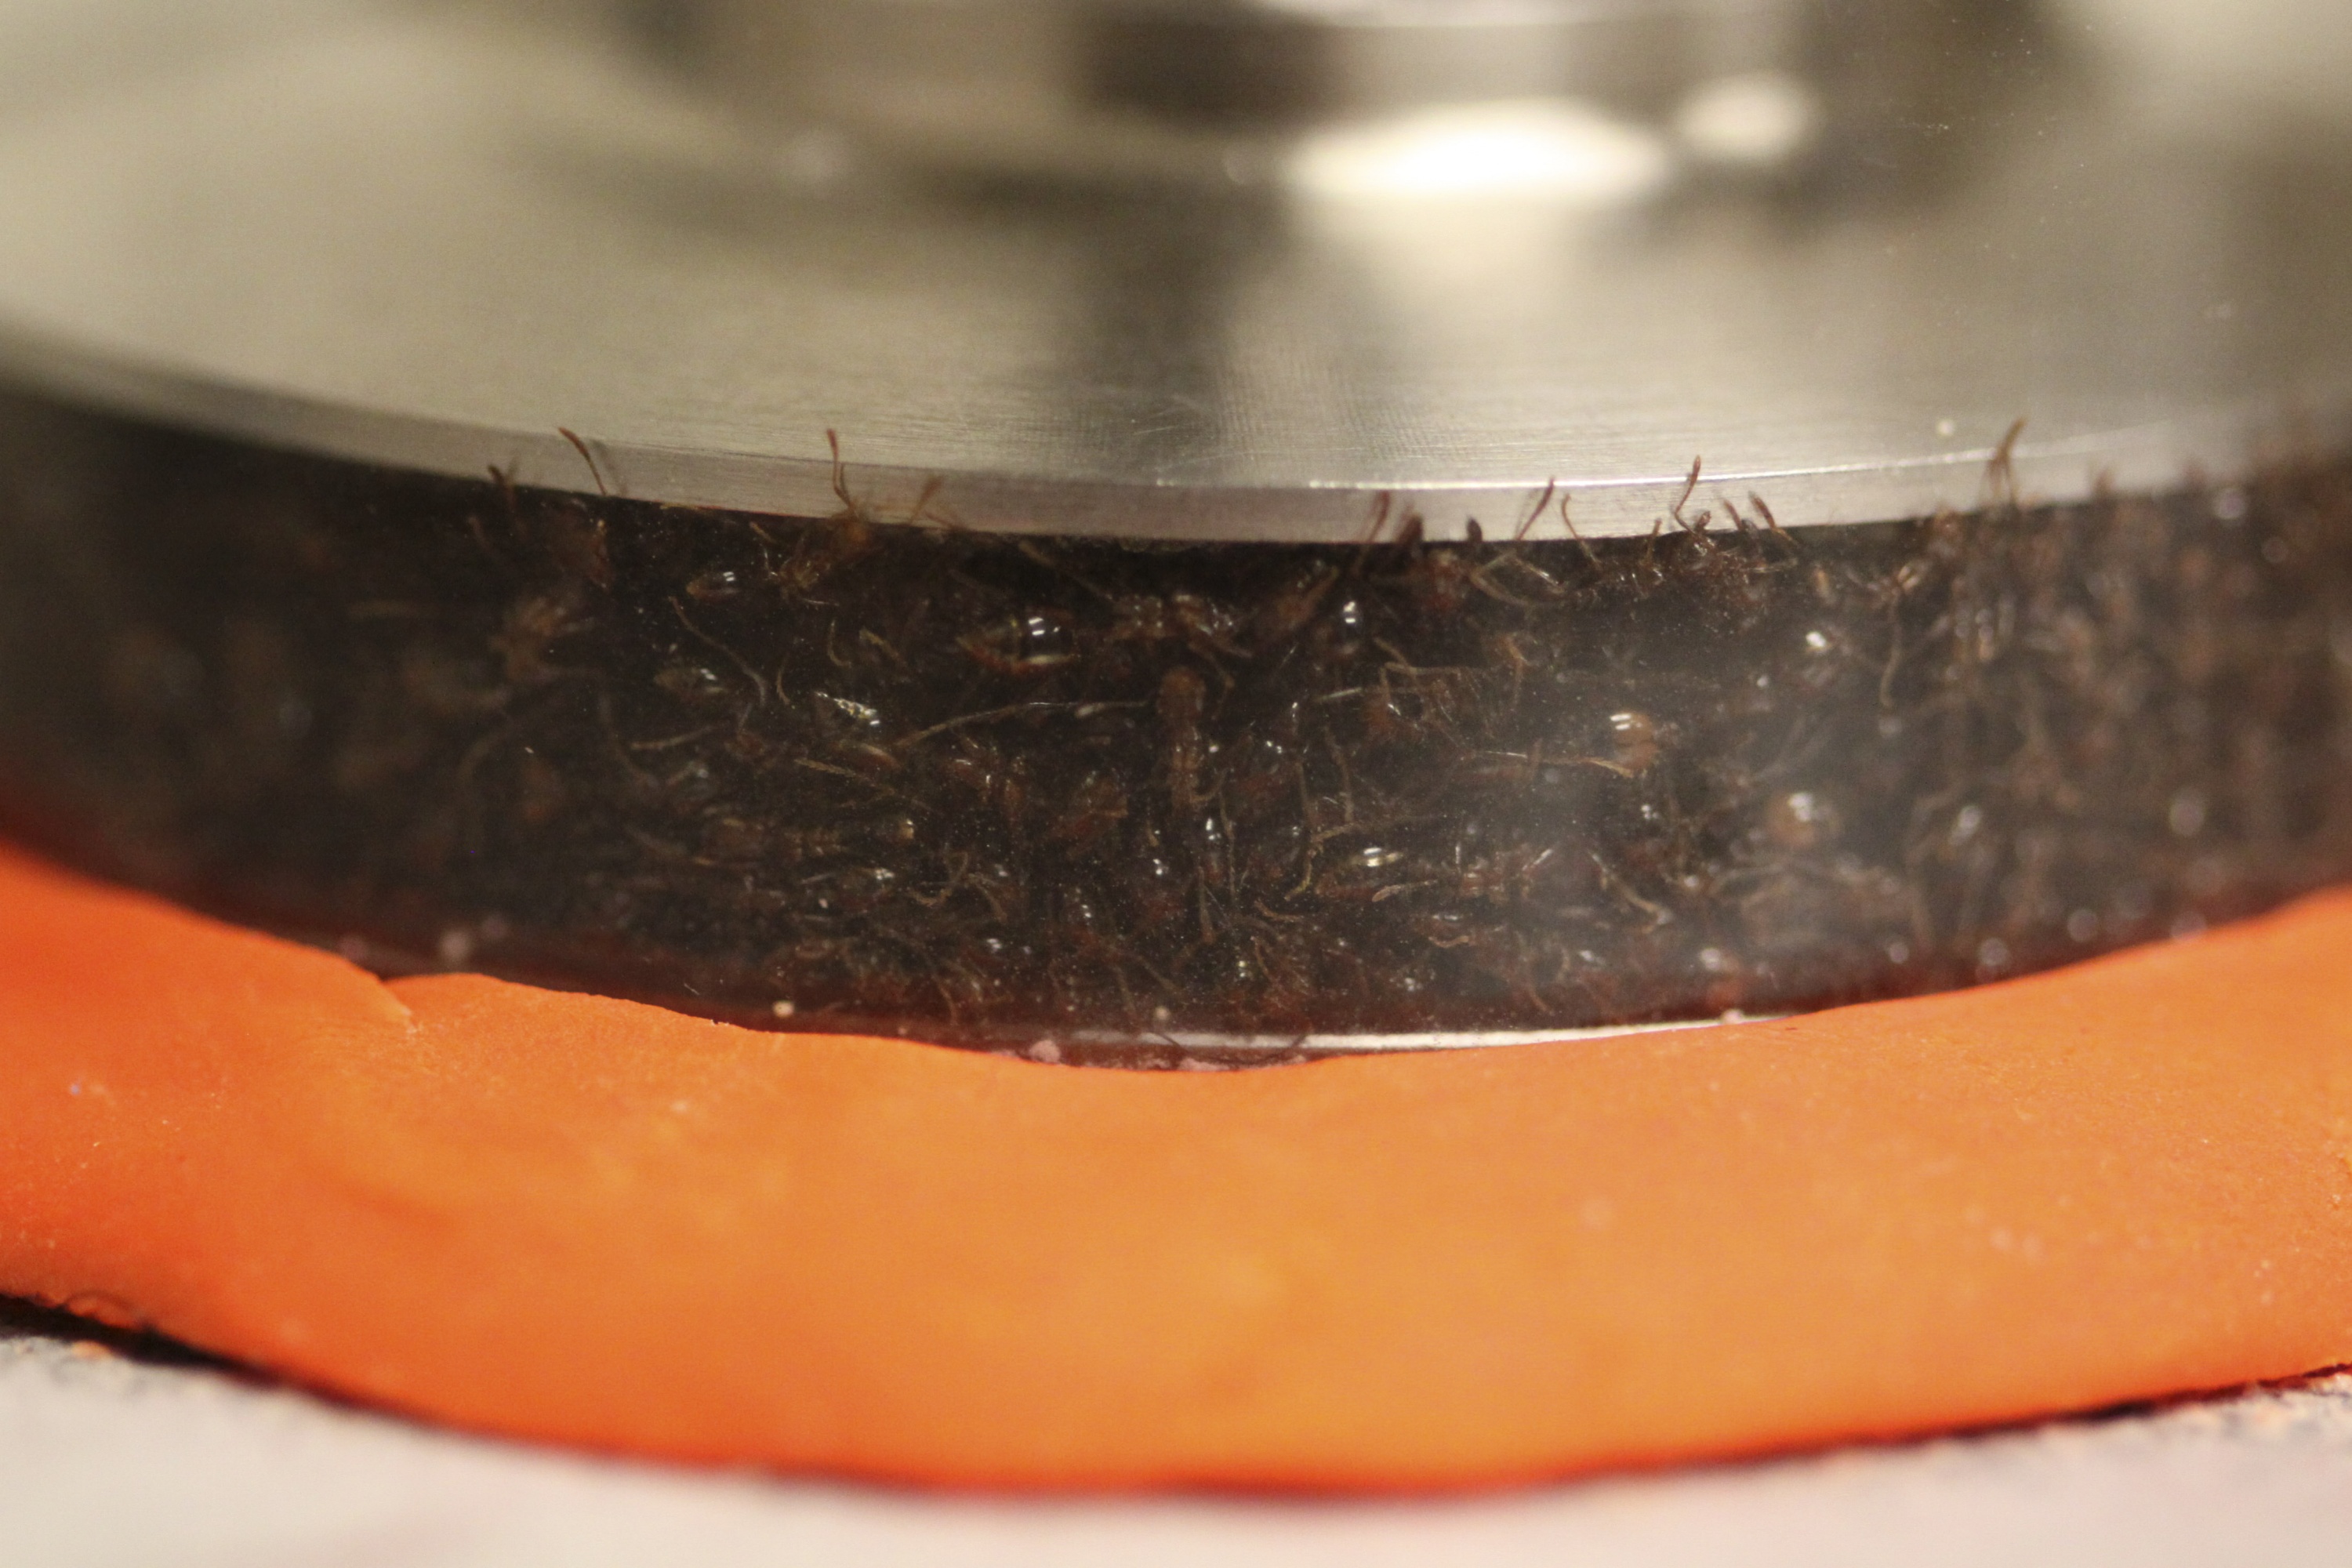 Ants were put in a rheometer, a machine used to test the solid-like and liquid-like response of materials such as food, hand cream or melted plastic.